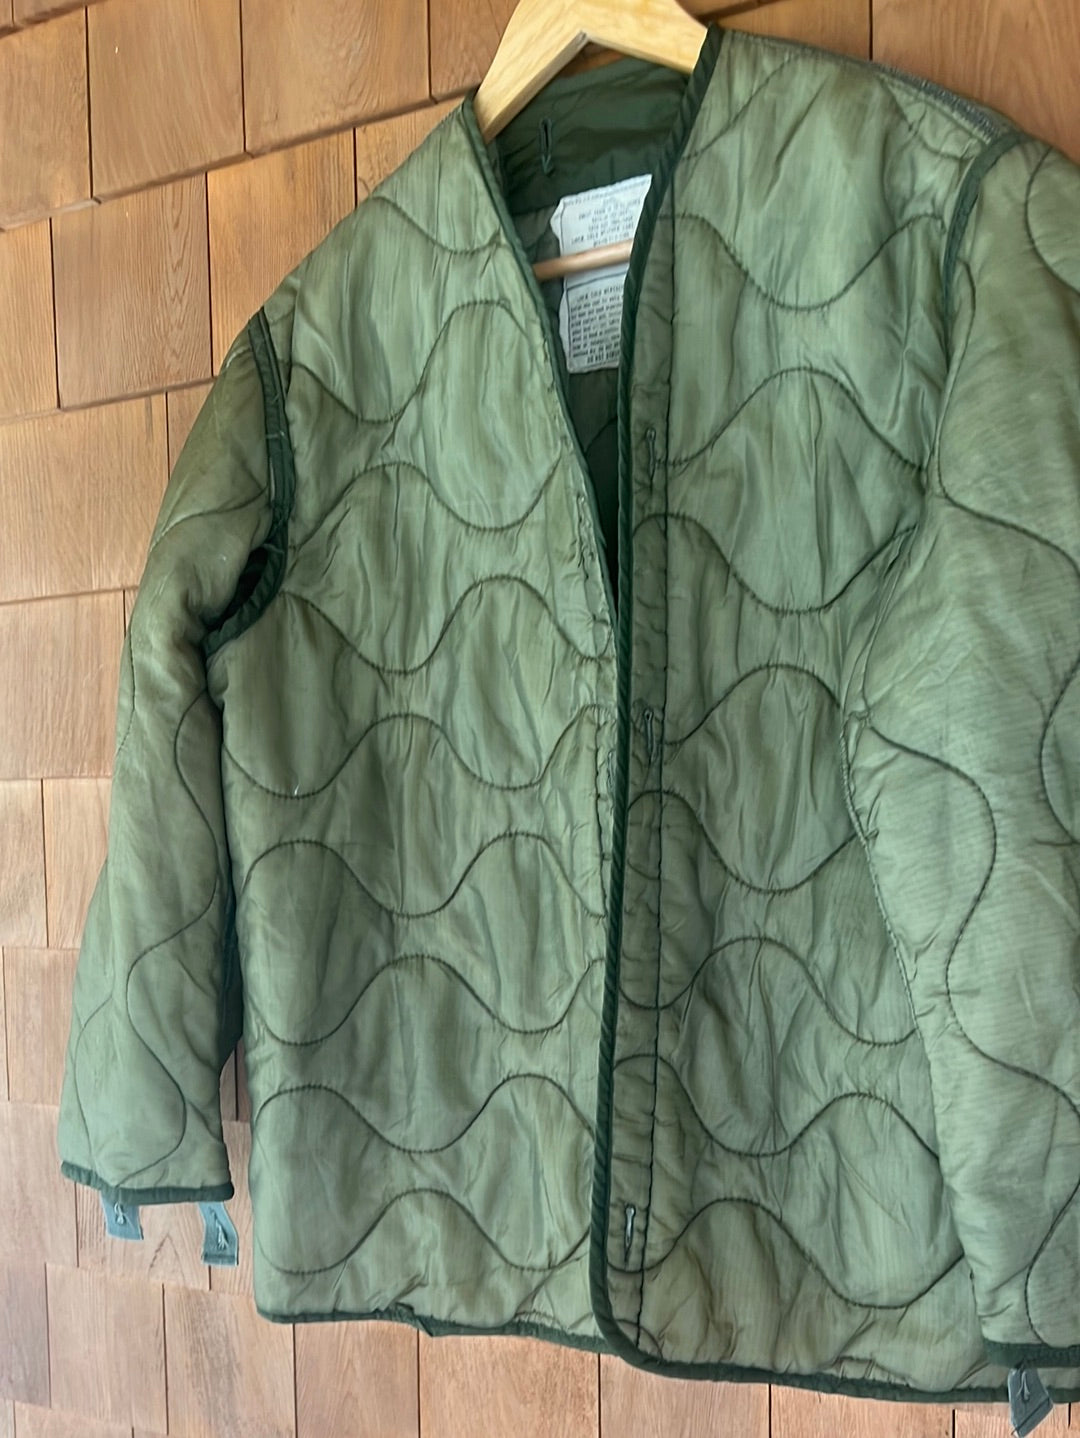 Vintage Quilted Liner Coat - Small